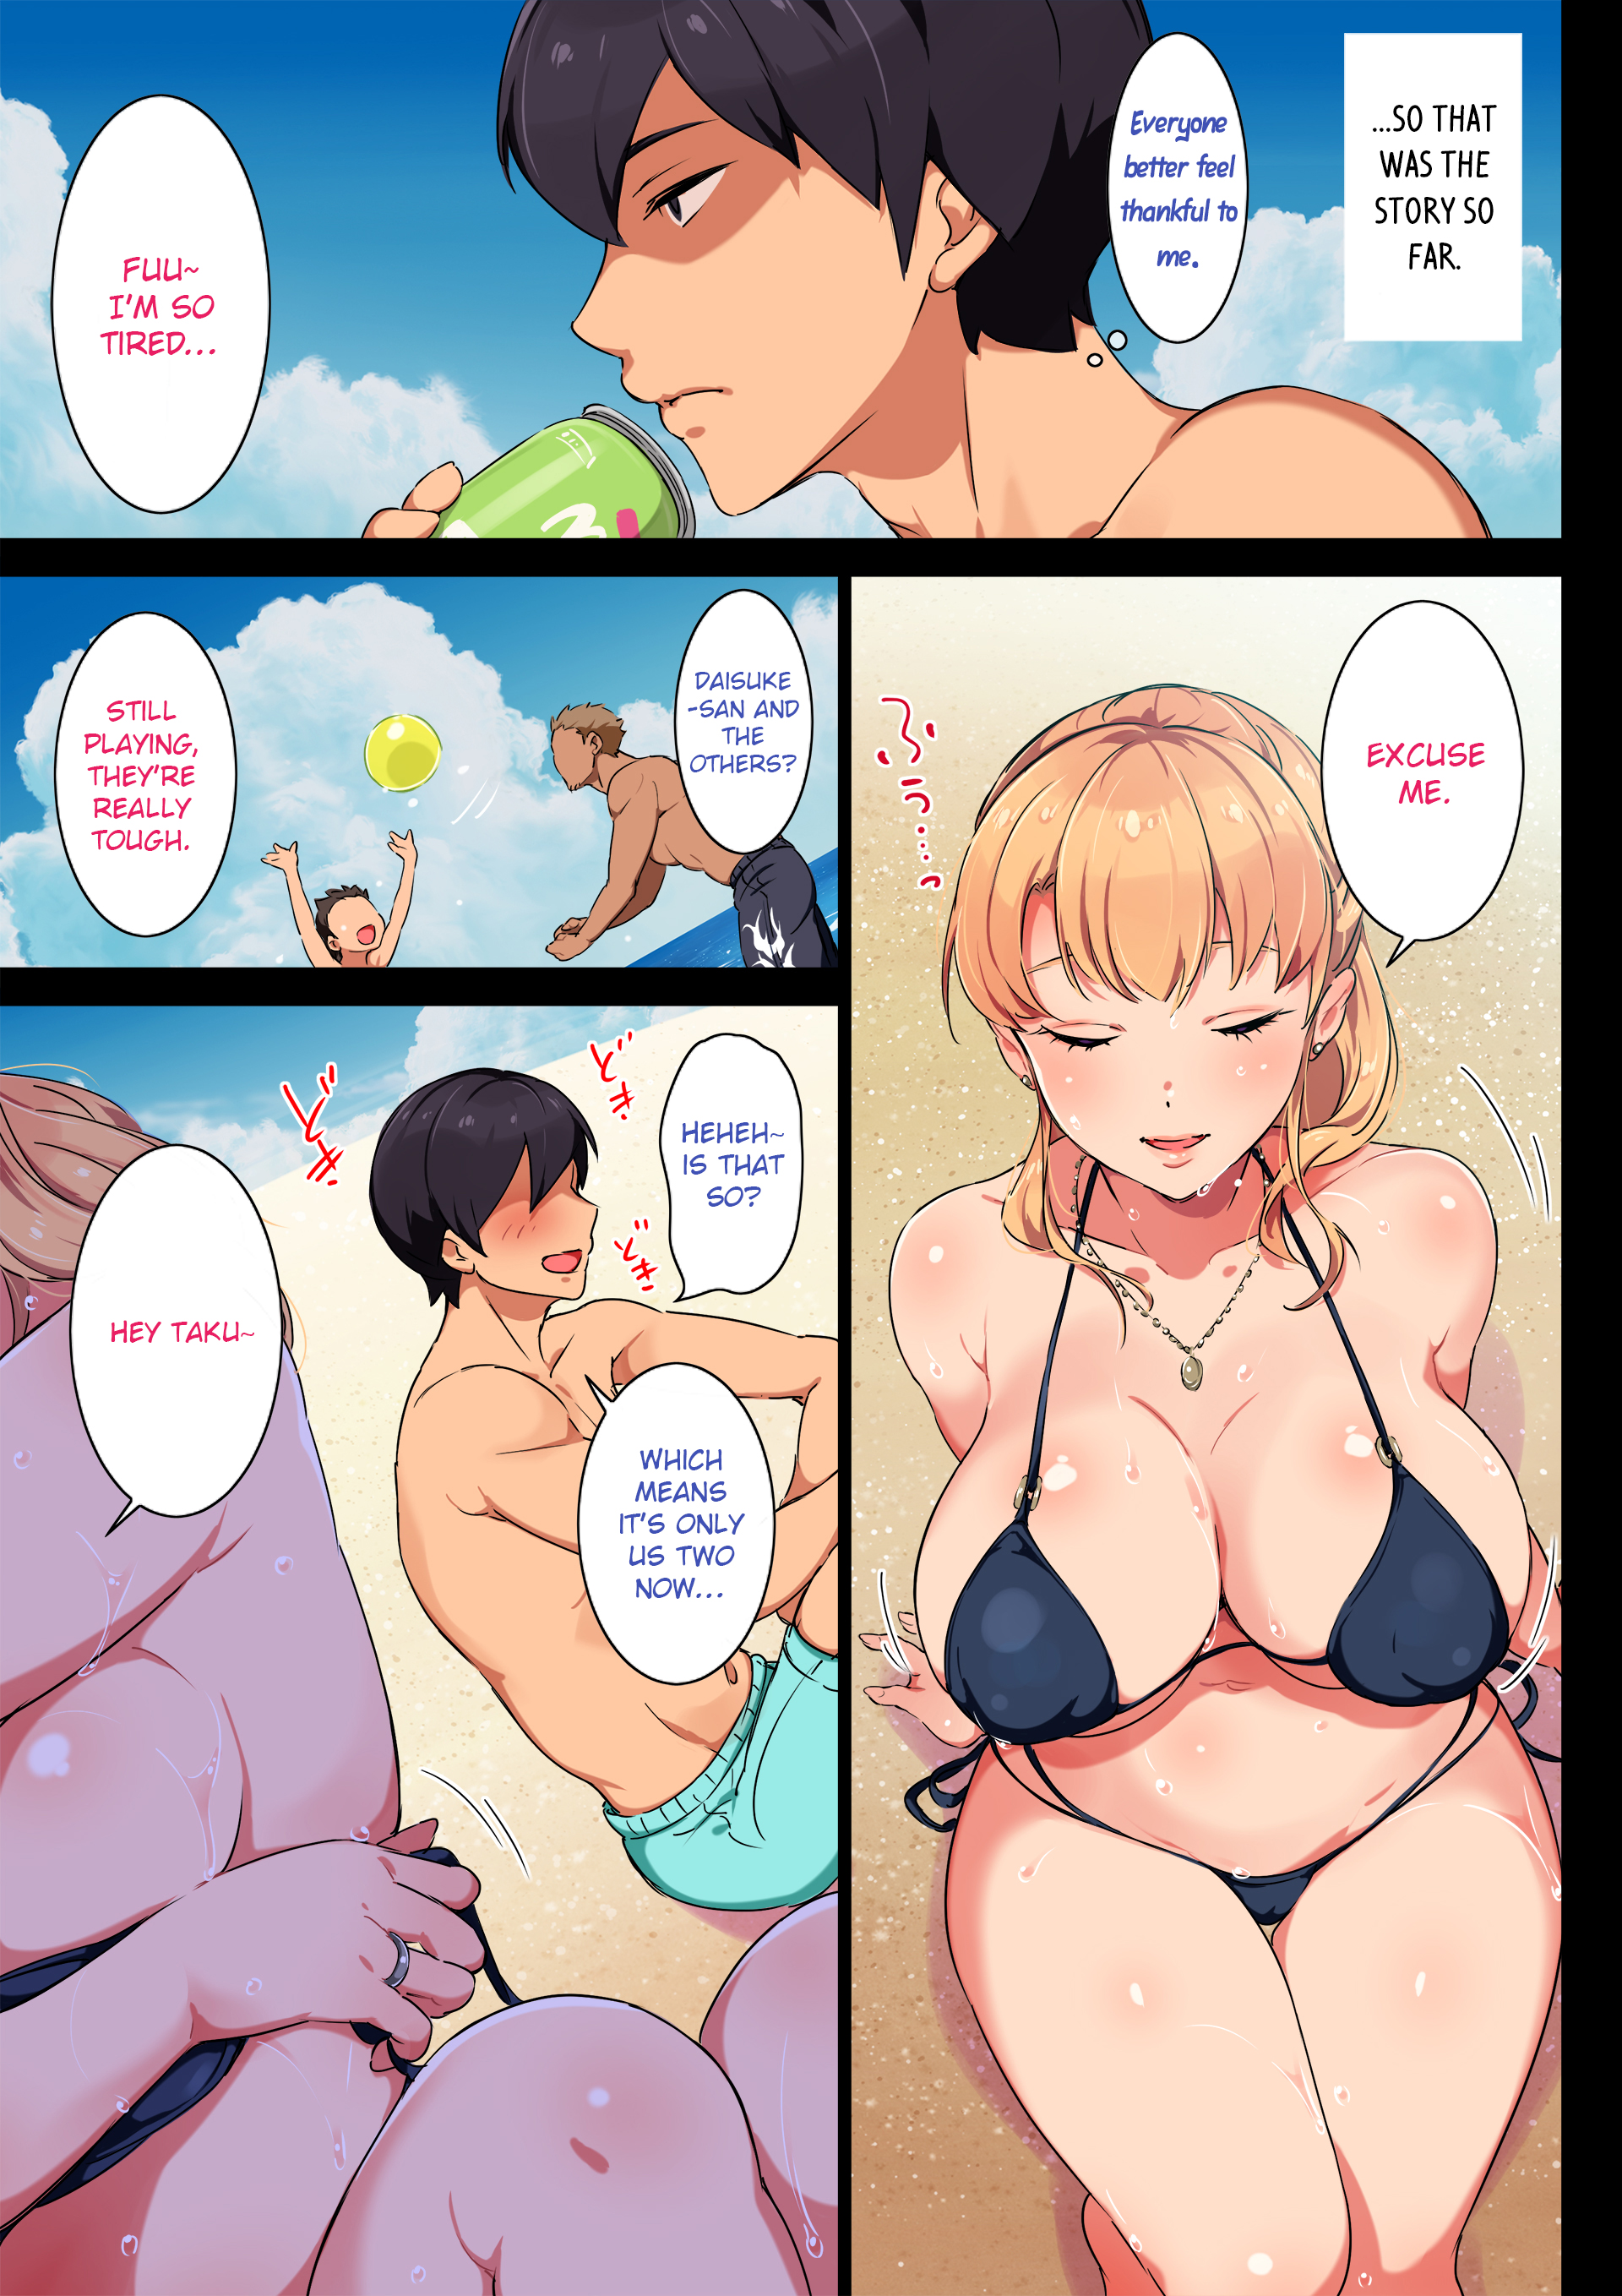 Pervy busty sister fucks her younger brother in the ocean - taboo comics